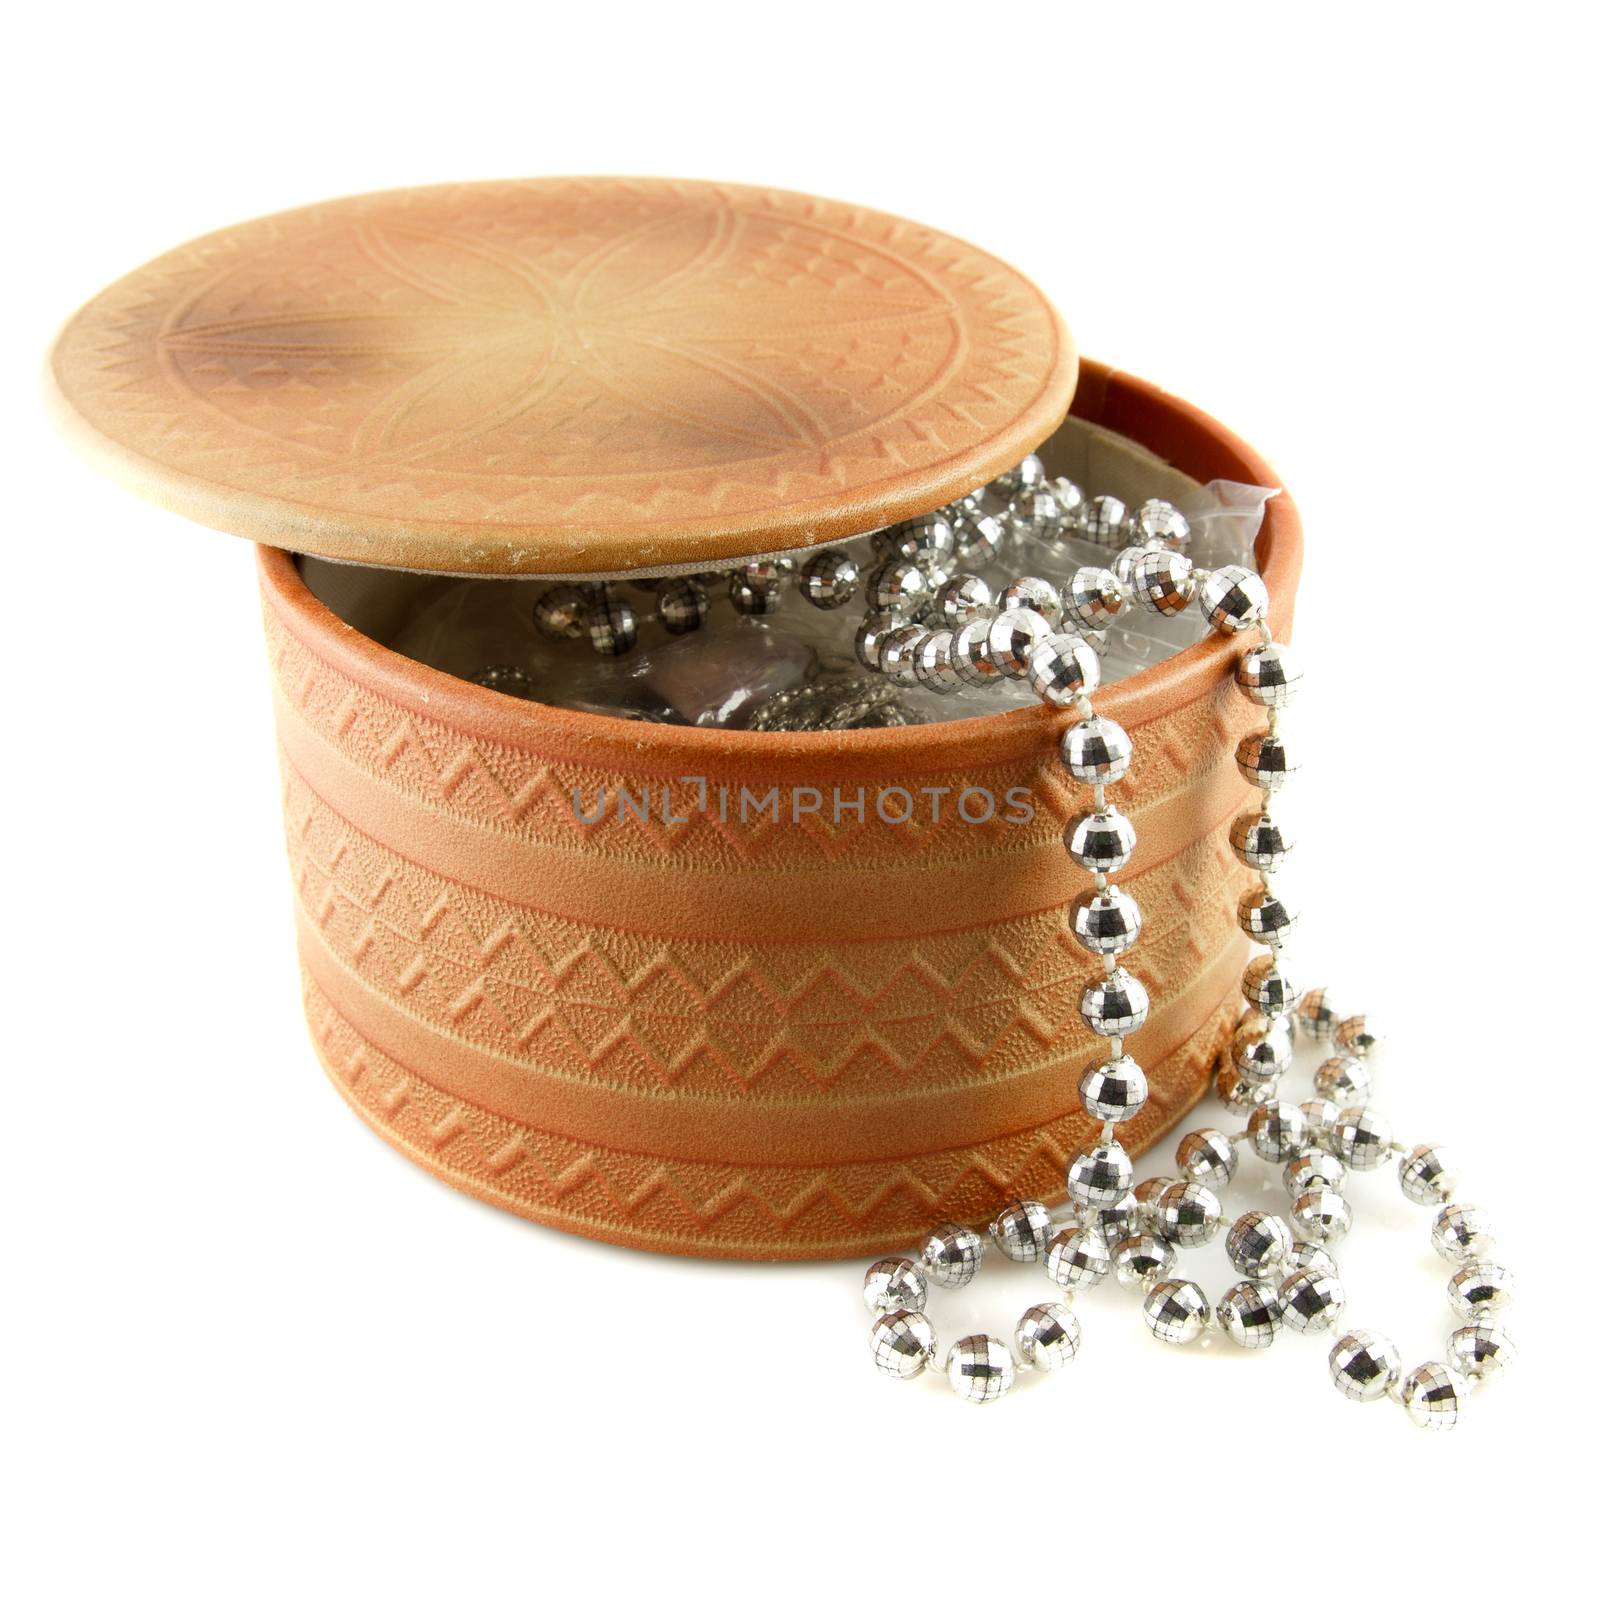 Leather box with jewelry by AigarsR